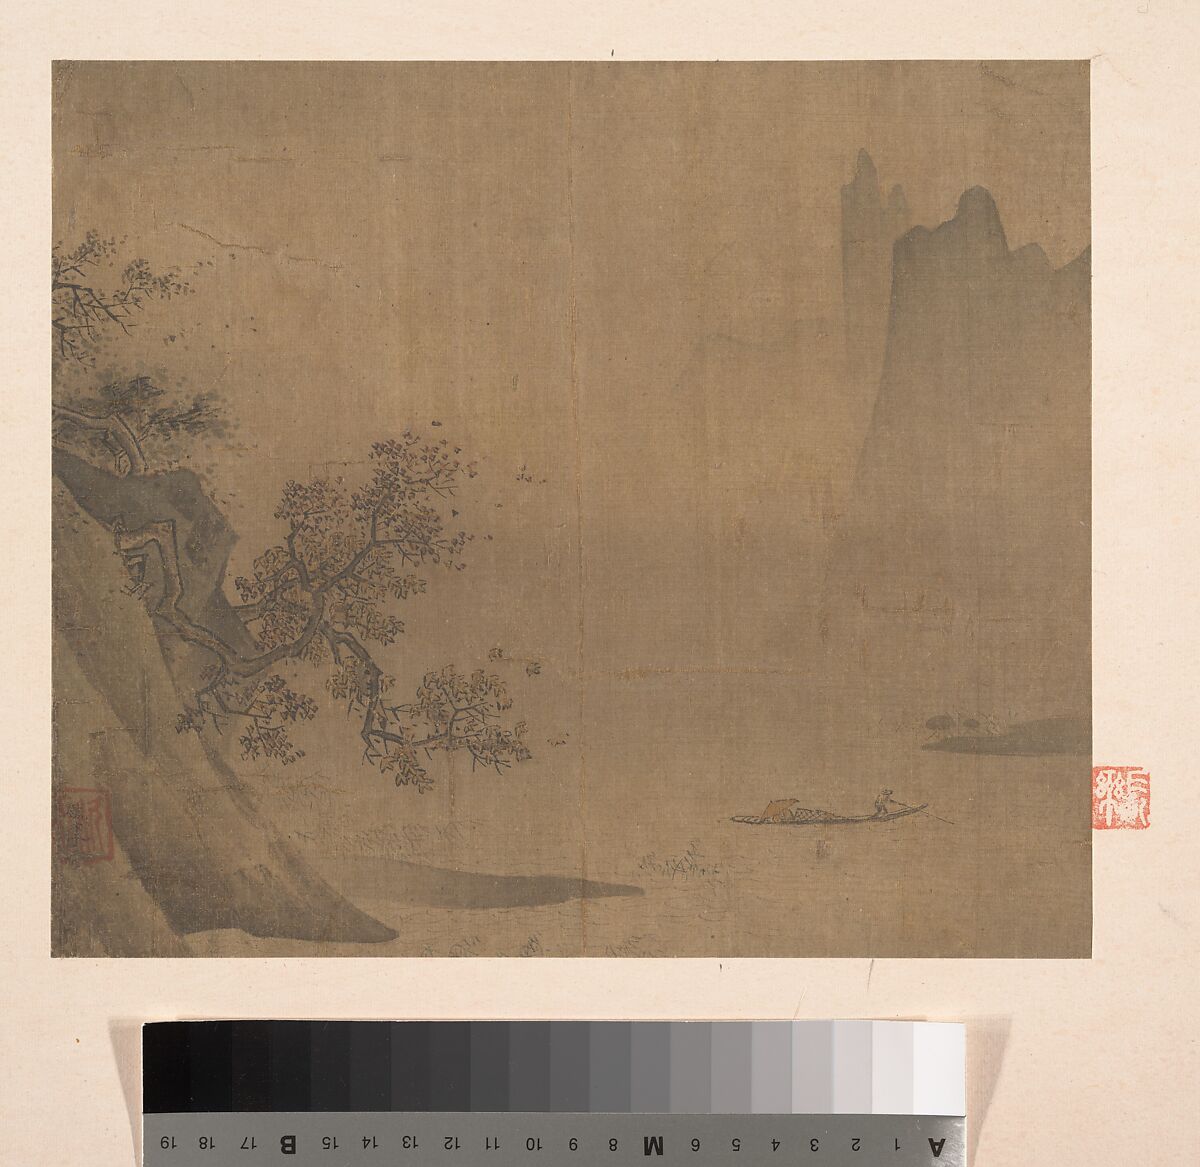 Rainy Landscape, Unidentified artist, Album leaf; ink and color on silk, China 